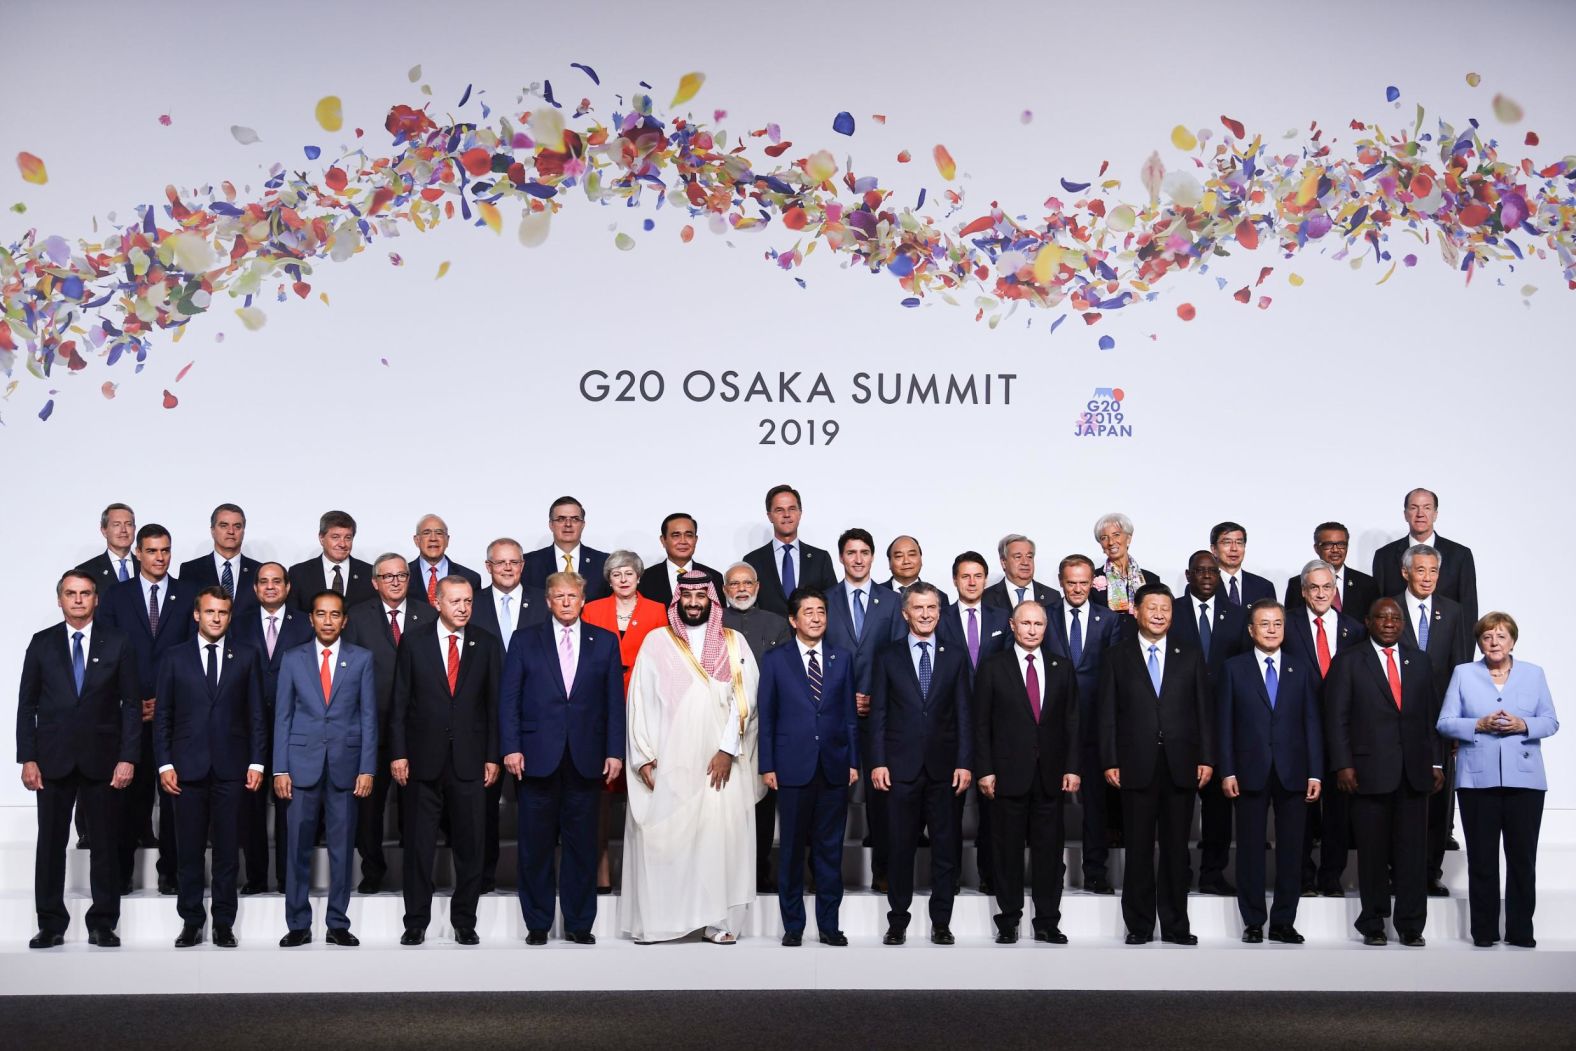 Leaders pose for a group photo at the G20 summit in Osaka. 